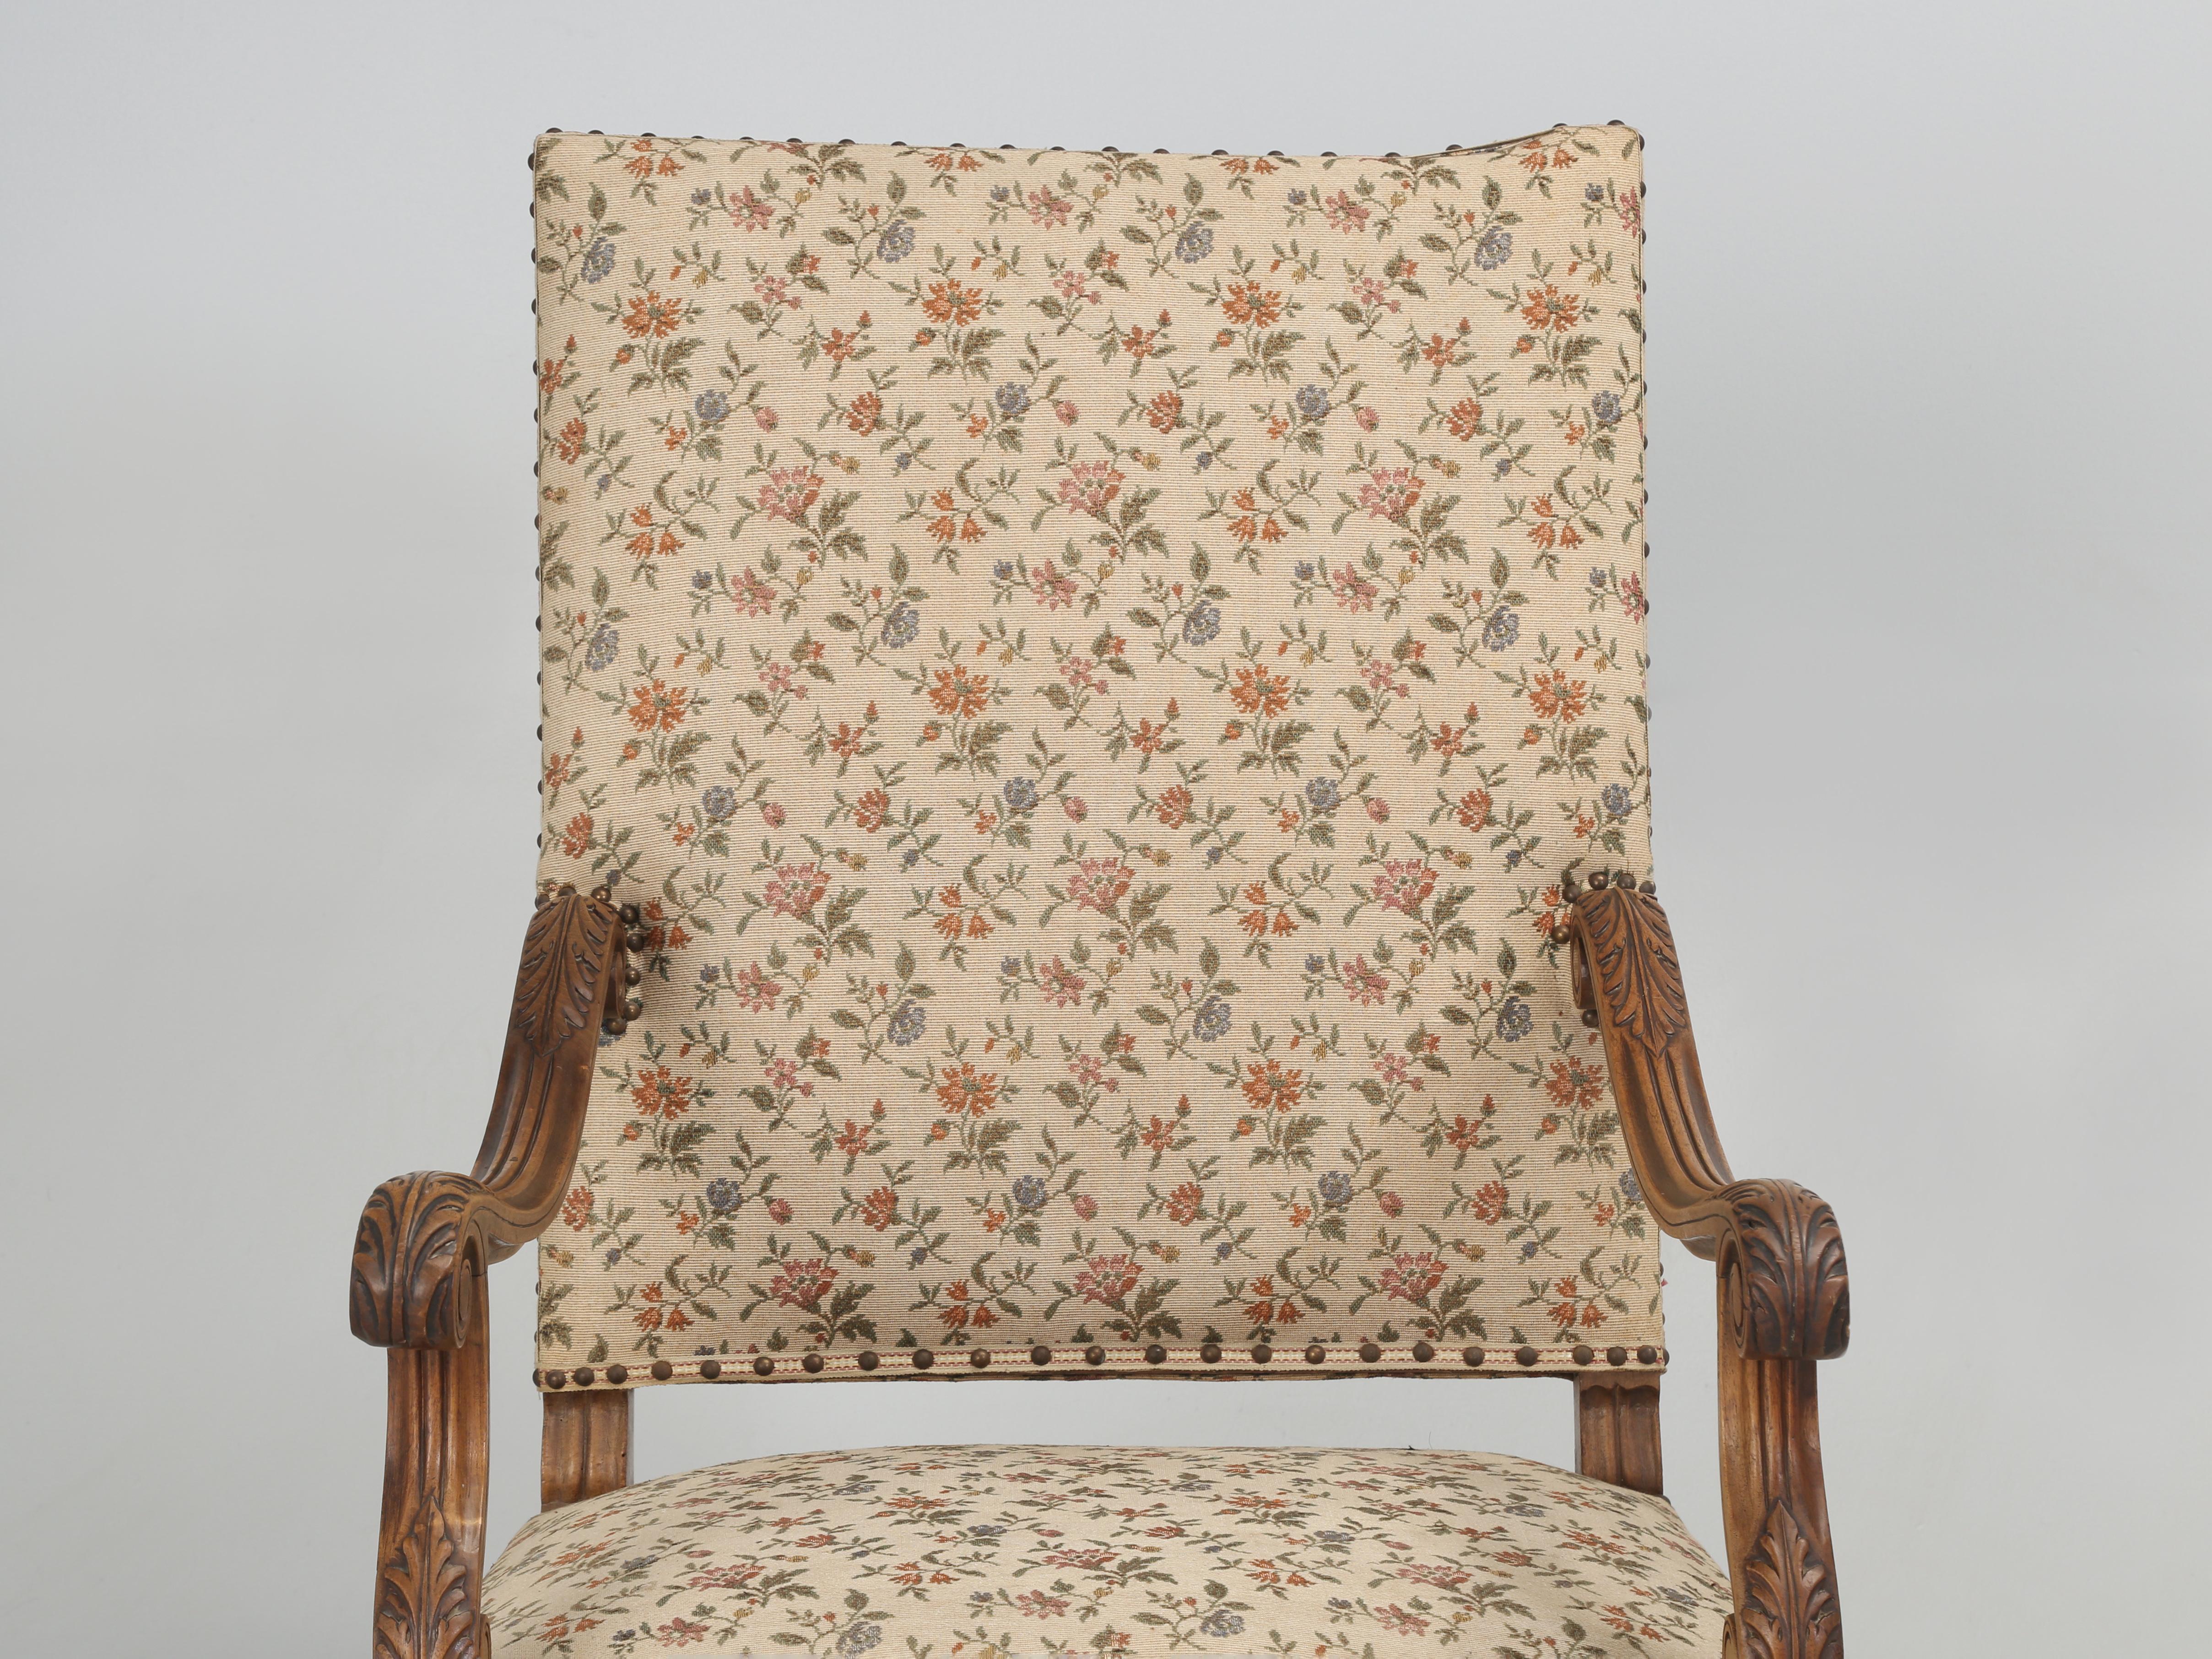 Antique French Armchair or Antique French Throne Chair that was hand-carved from walnut probably in the late 1800's and is in dire need of a visit to your favorite upholstery shop. The antique french walnut chair frame is of a high quality and well